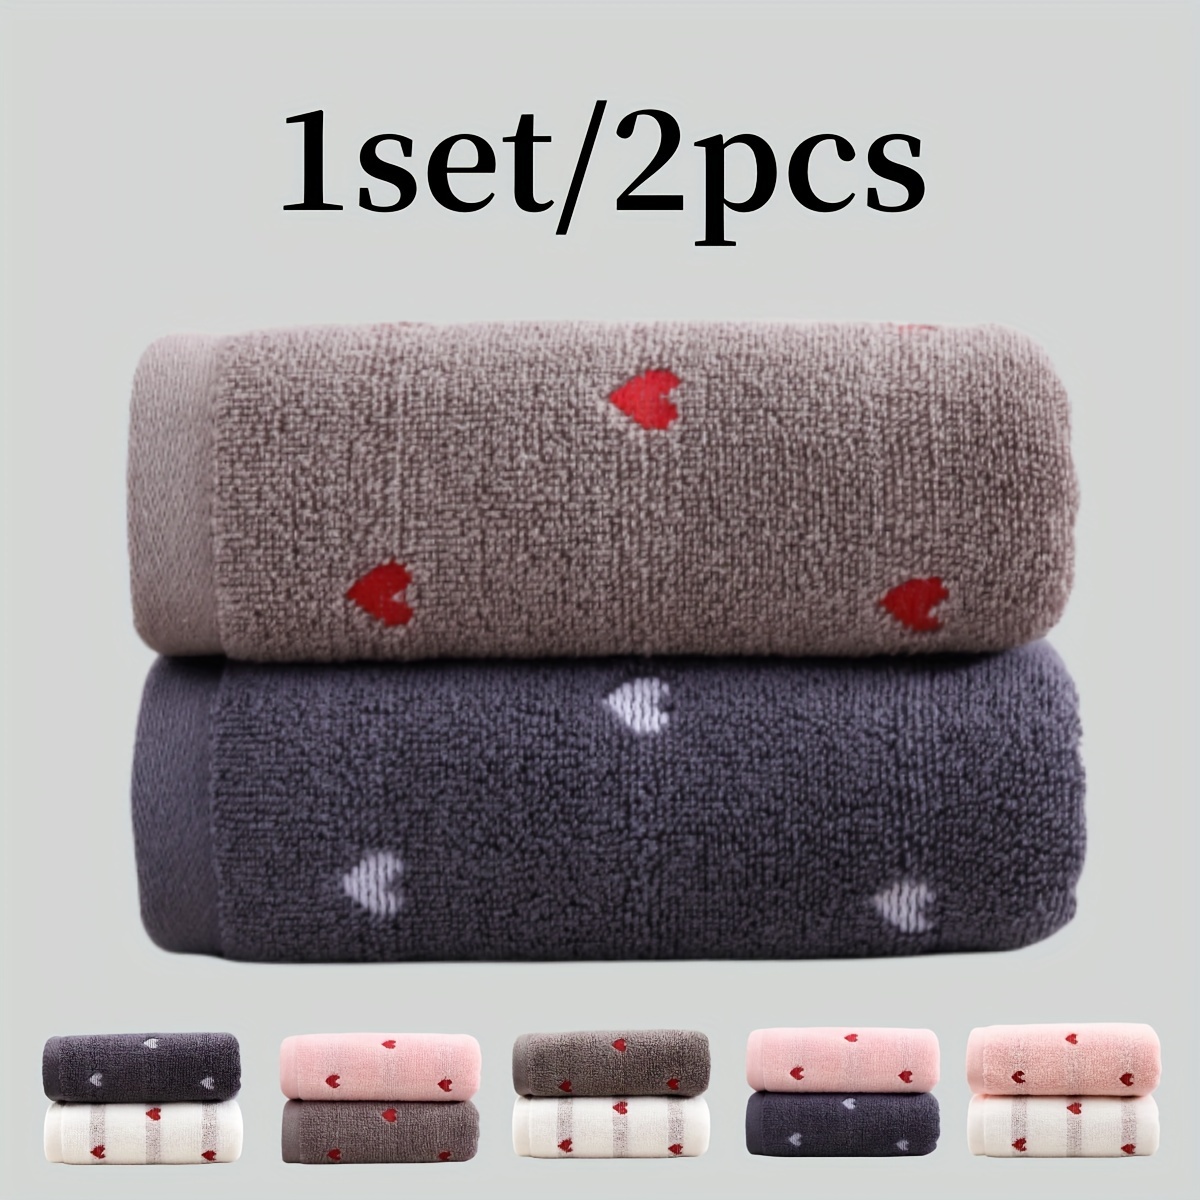 

1set/2pcs Cotton Towels With Heart Jacquard Design, 13.38 X 28.74 Inches, Thick Absorbent Soft Skin-friendly Face Towels, Multiple Color Options For Bathroom Use, Modern Style